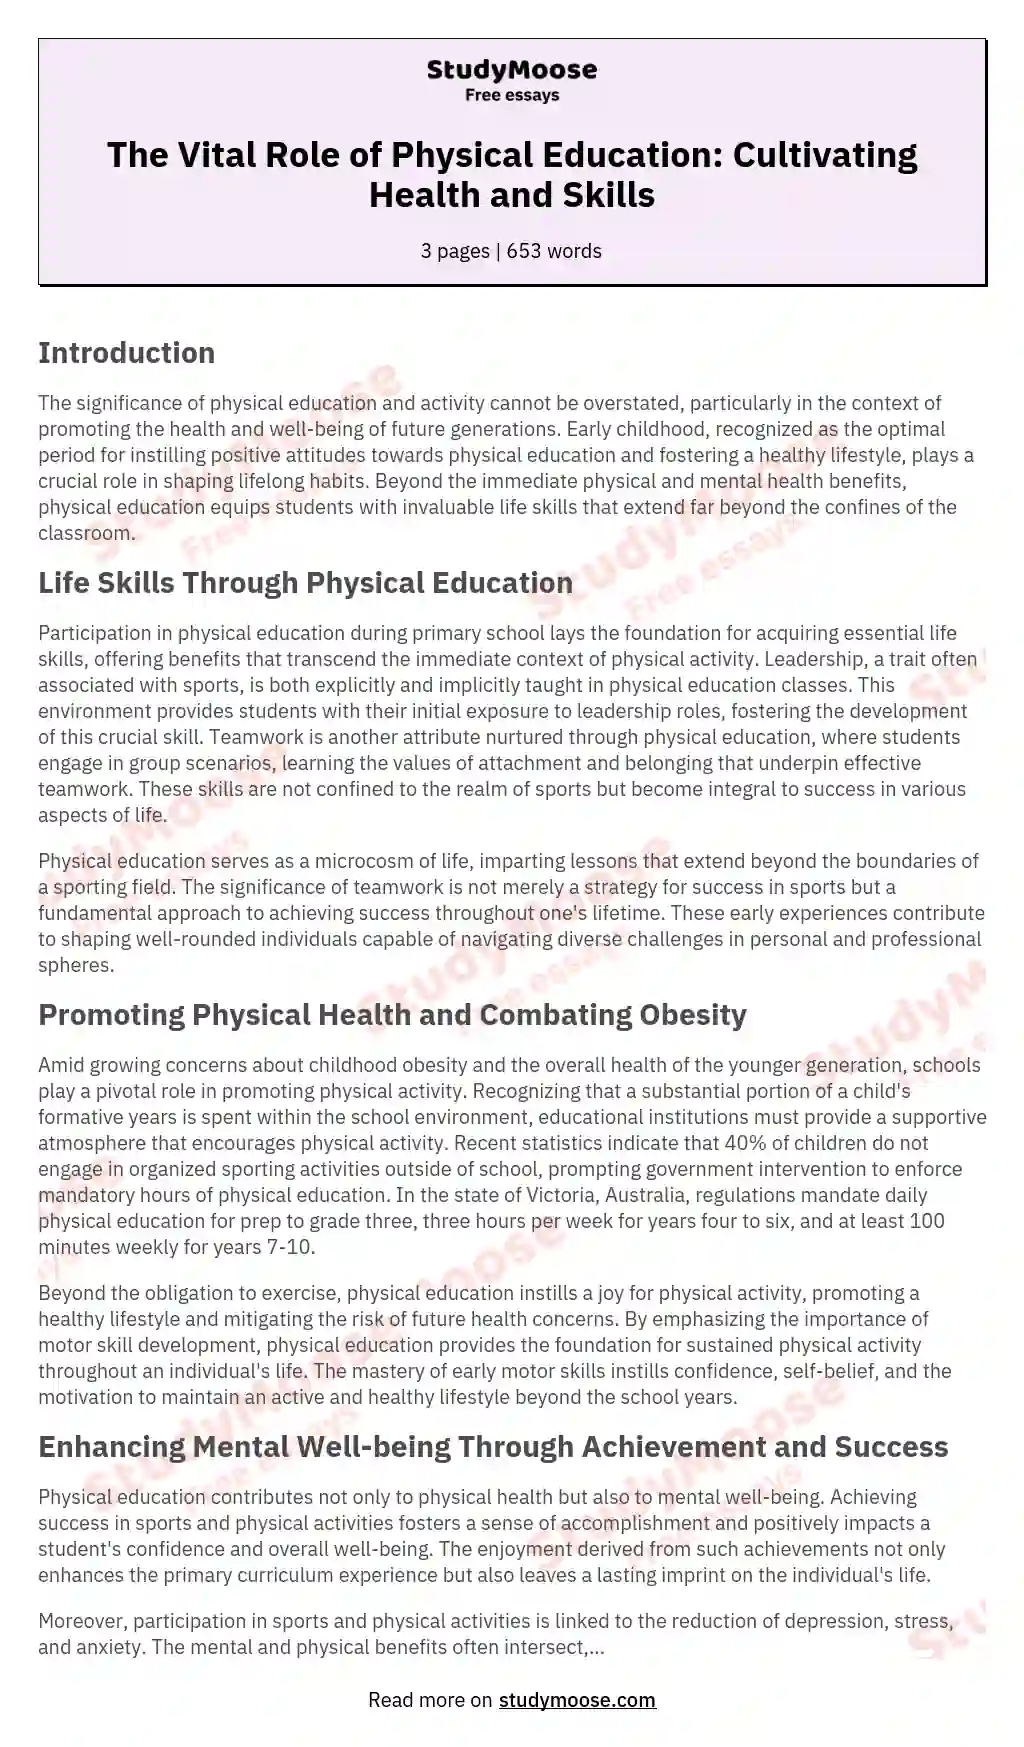 The Vital Role of Physical Education: Cultivating Health and Skills essay